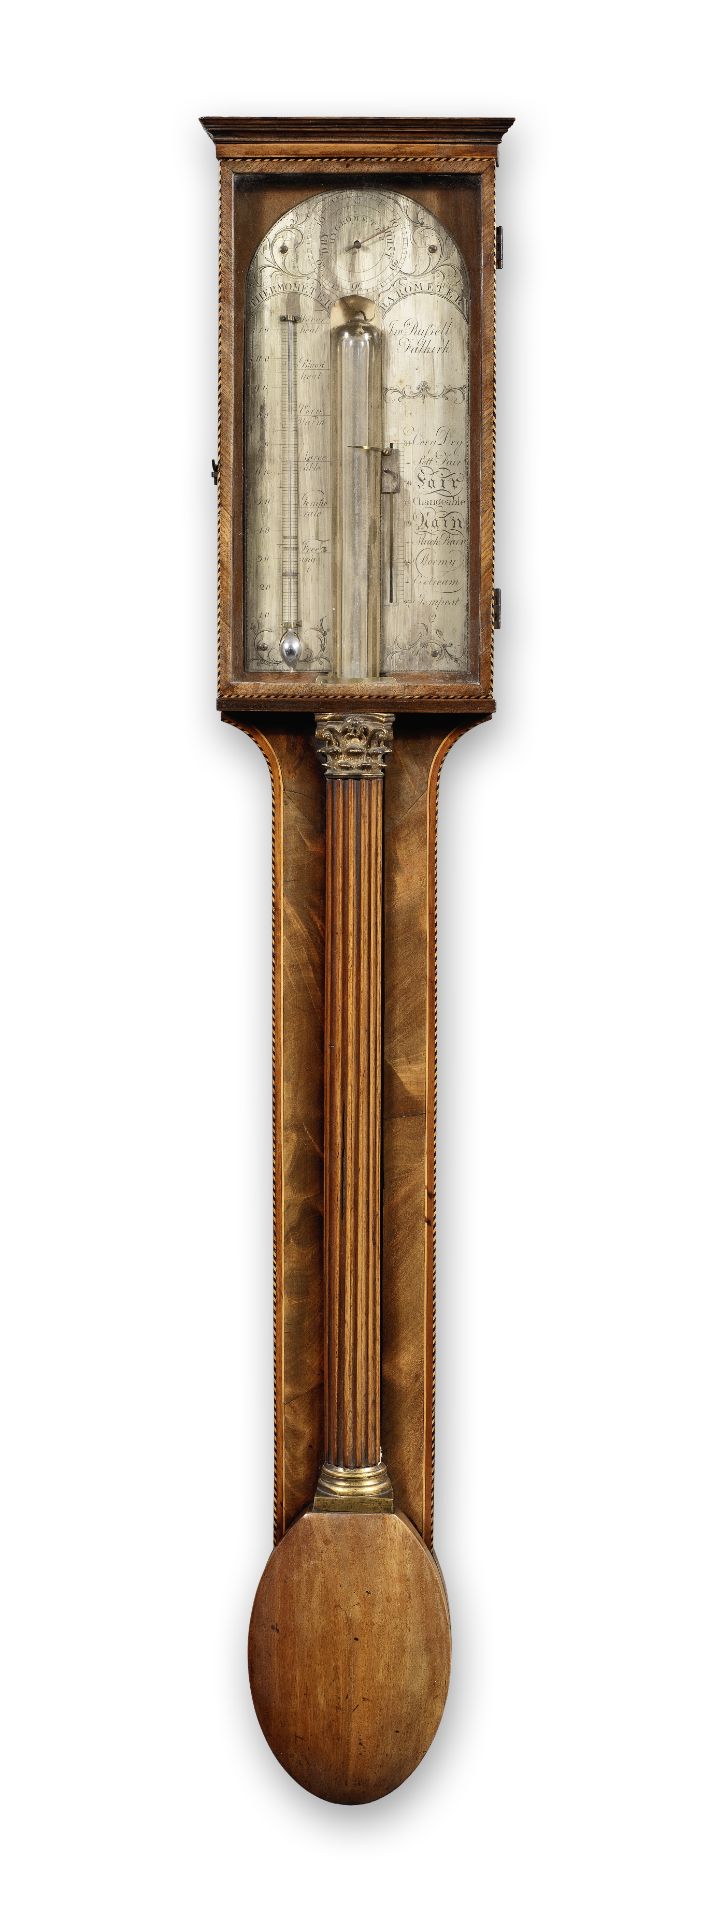 A fine and rare late 18th century mahogany stick barometer with one-inch diameter glass tube John...